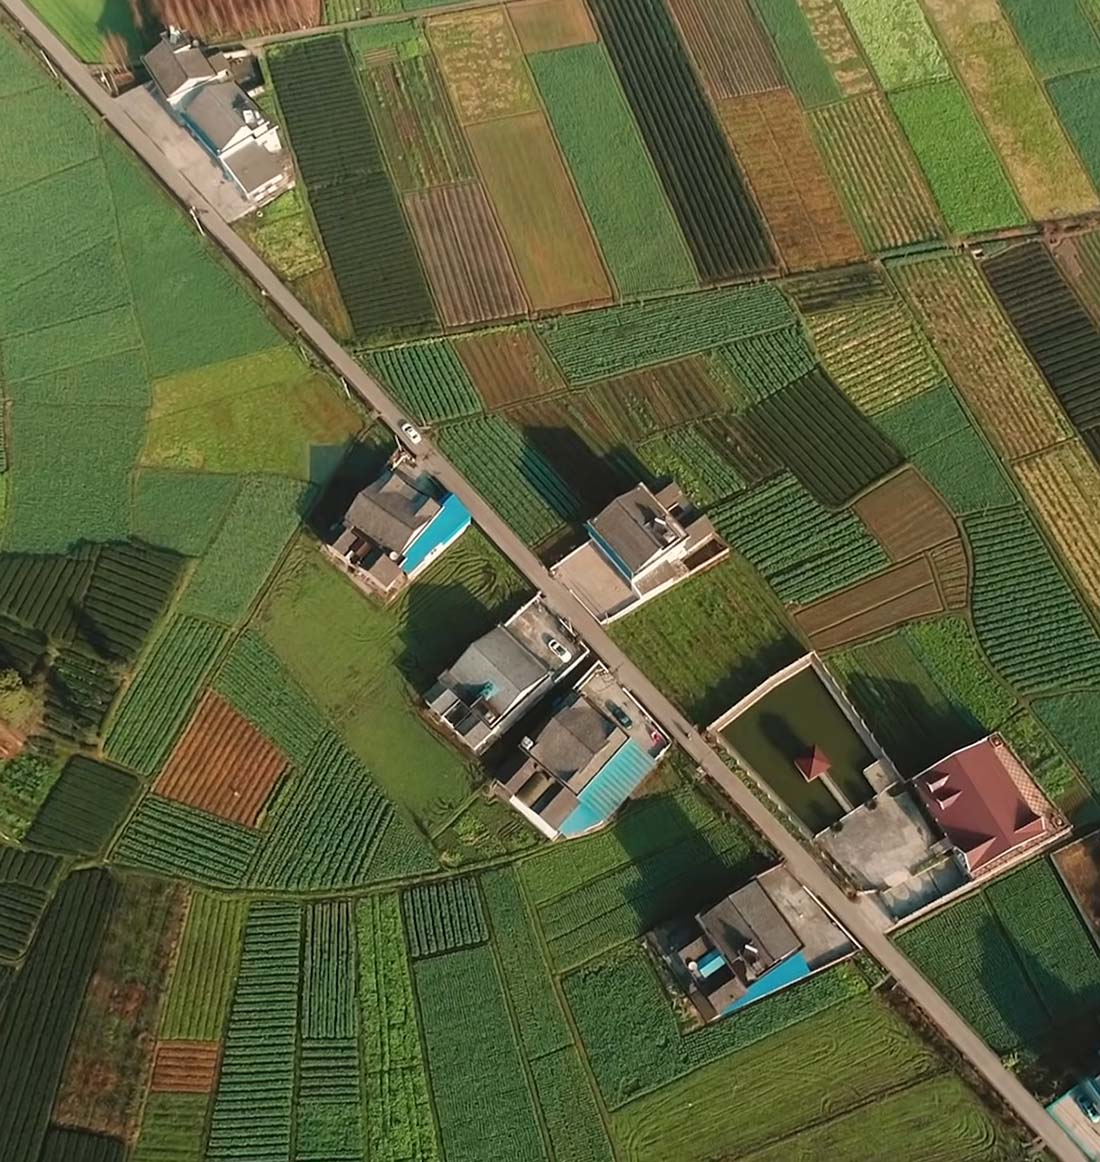 Aerial view of buildings on a farm